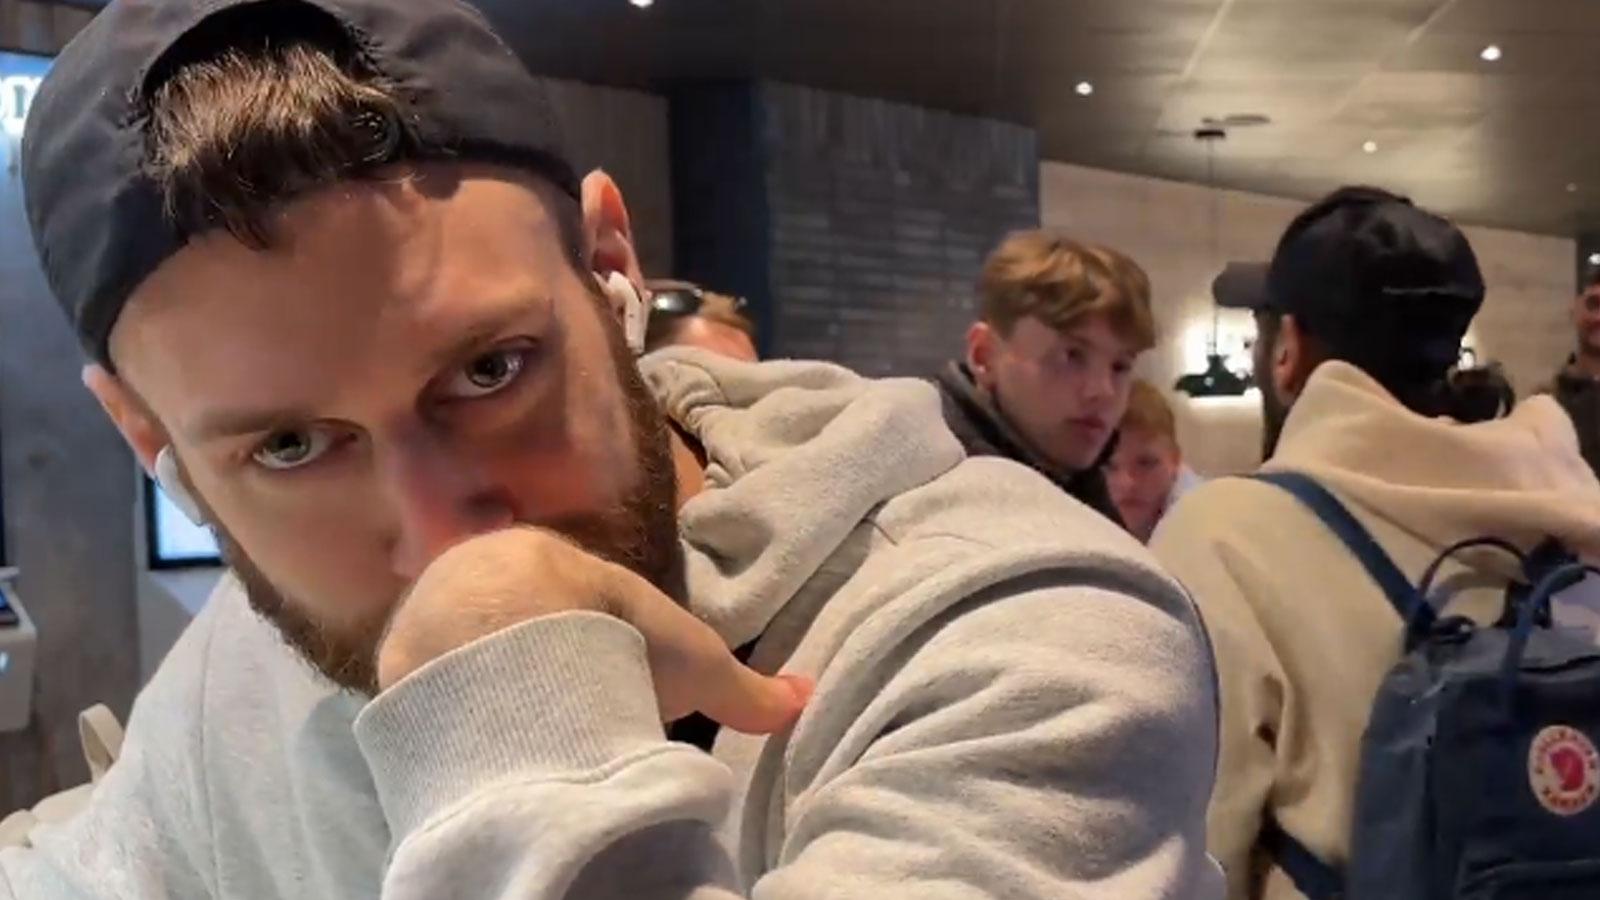 Twitch streamer gfysik with two men stood behind him in Burger King